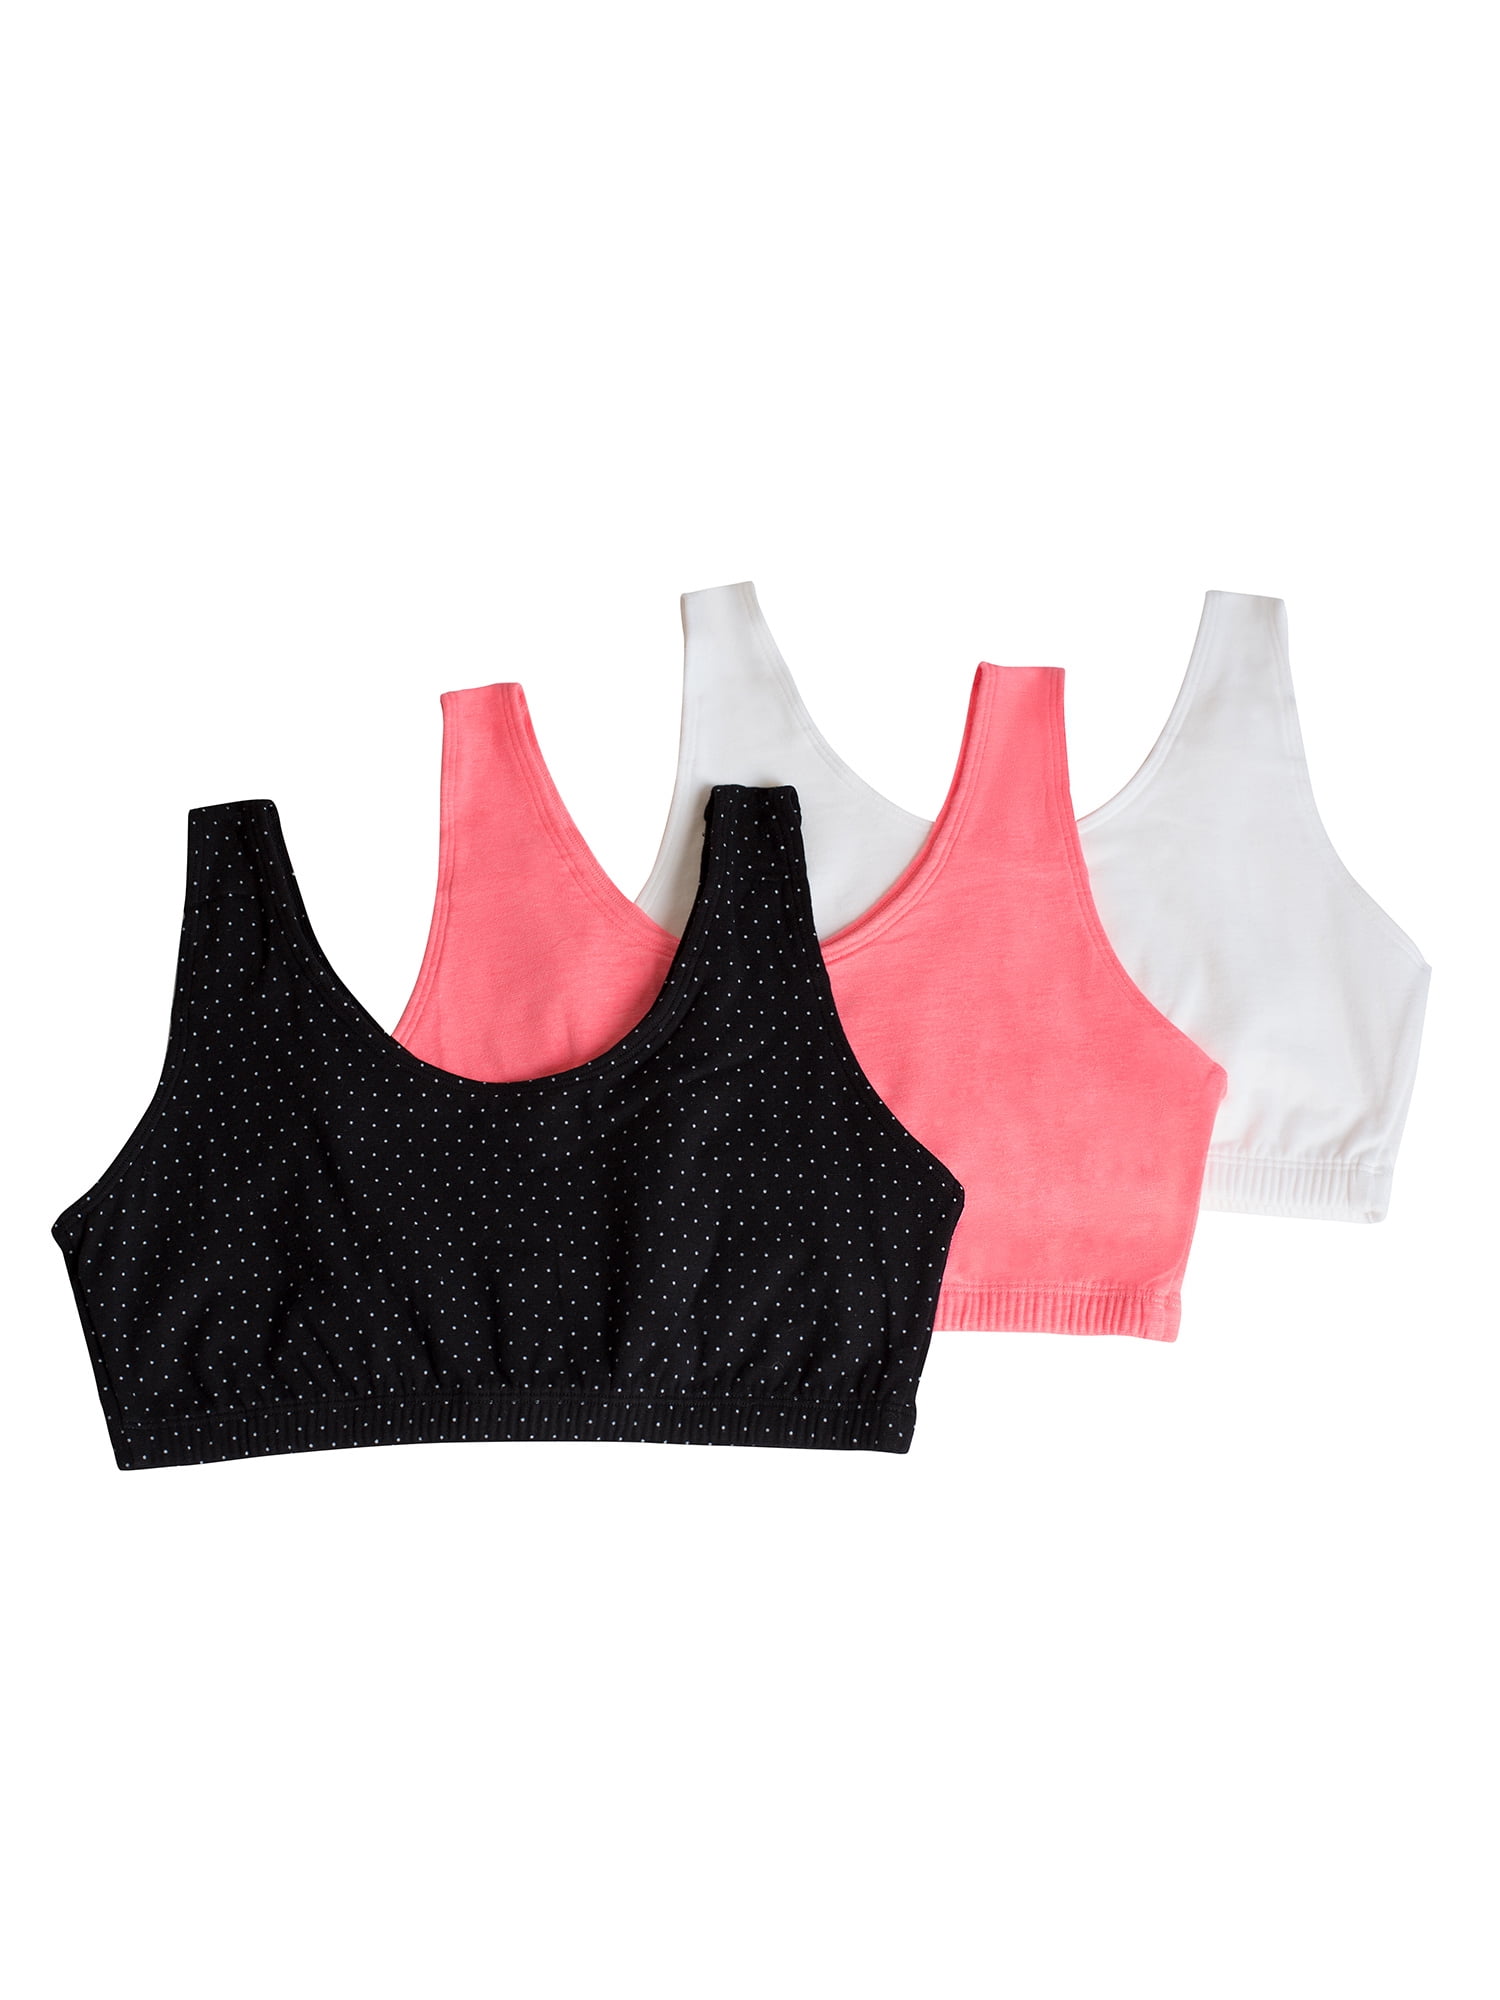 Fruit of the Loom Women's Tank Style Cotton Sports Bra, 3-Pack, Style-9012